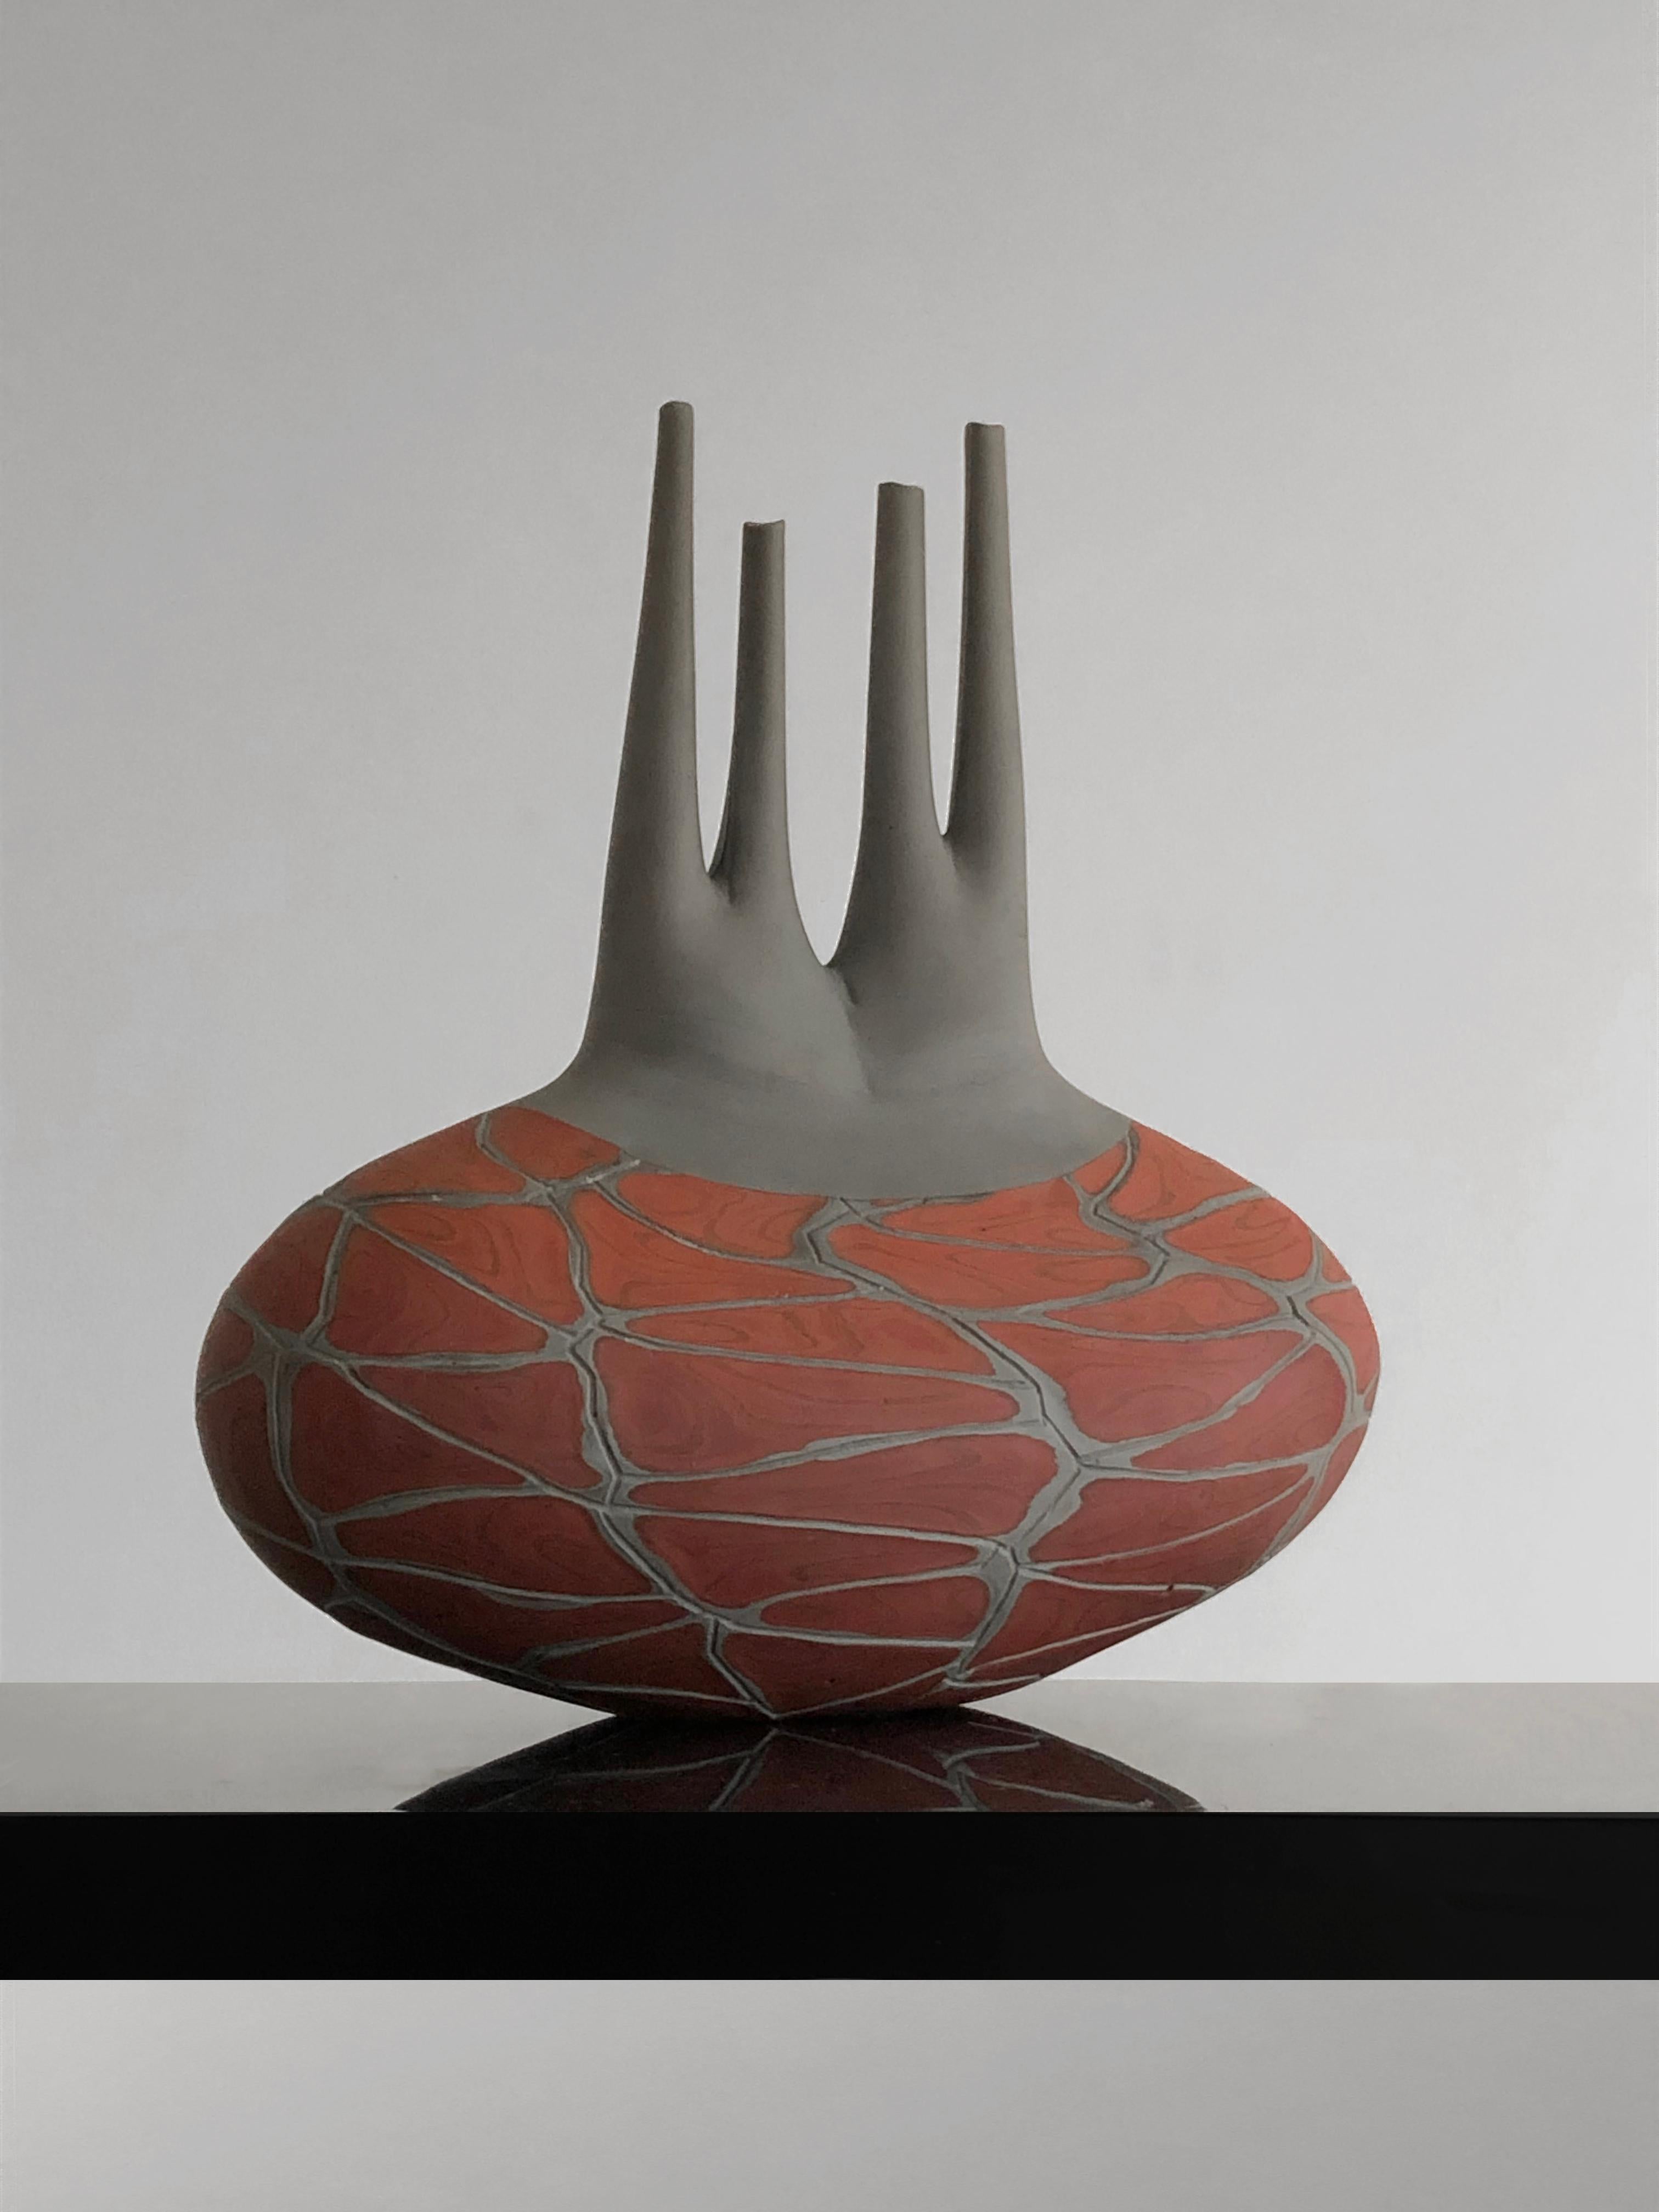 Murano Glass A SCULPTURAL BLOWN GLASS VASE, by DAVIDE SALVADORE, MURANO, Italy 2000. For Sale